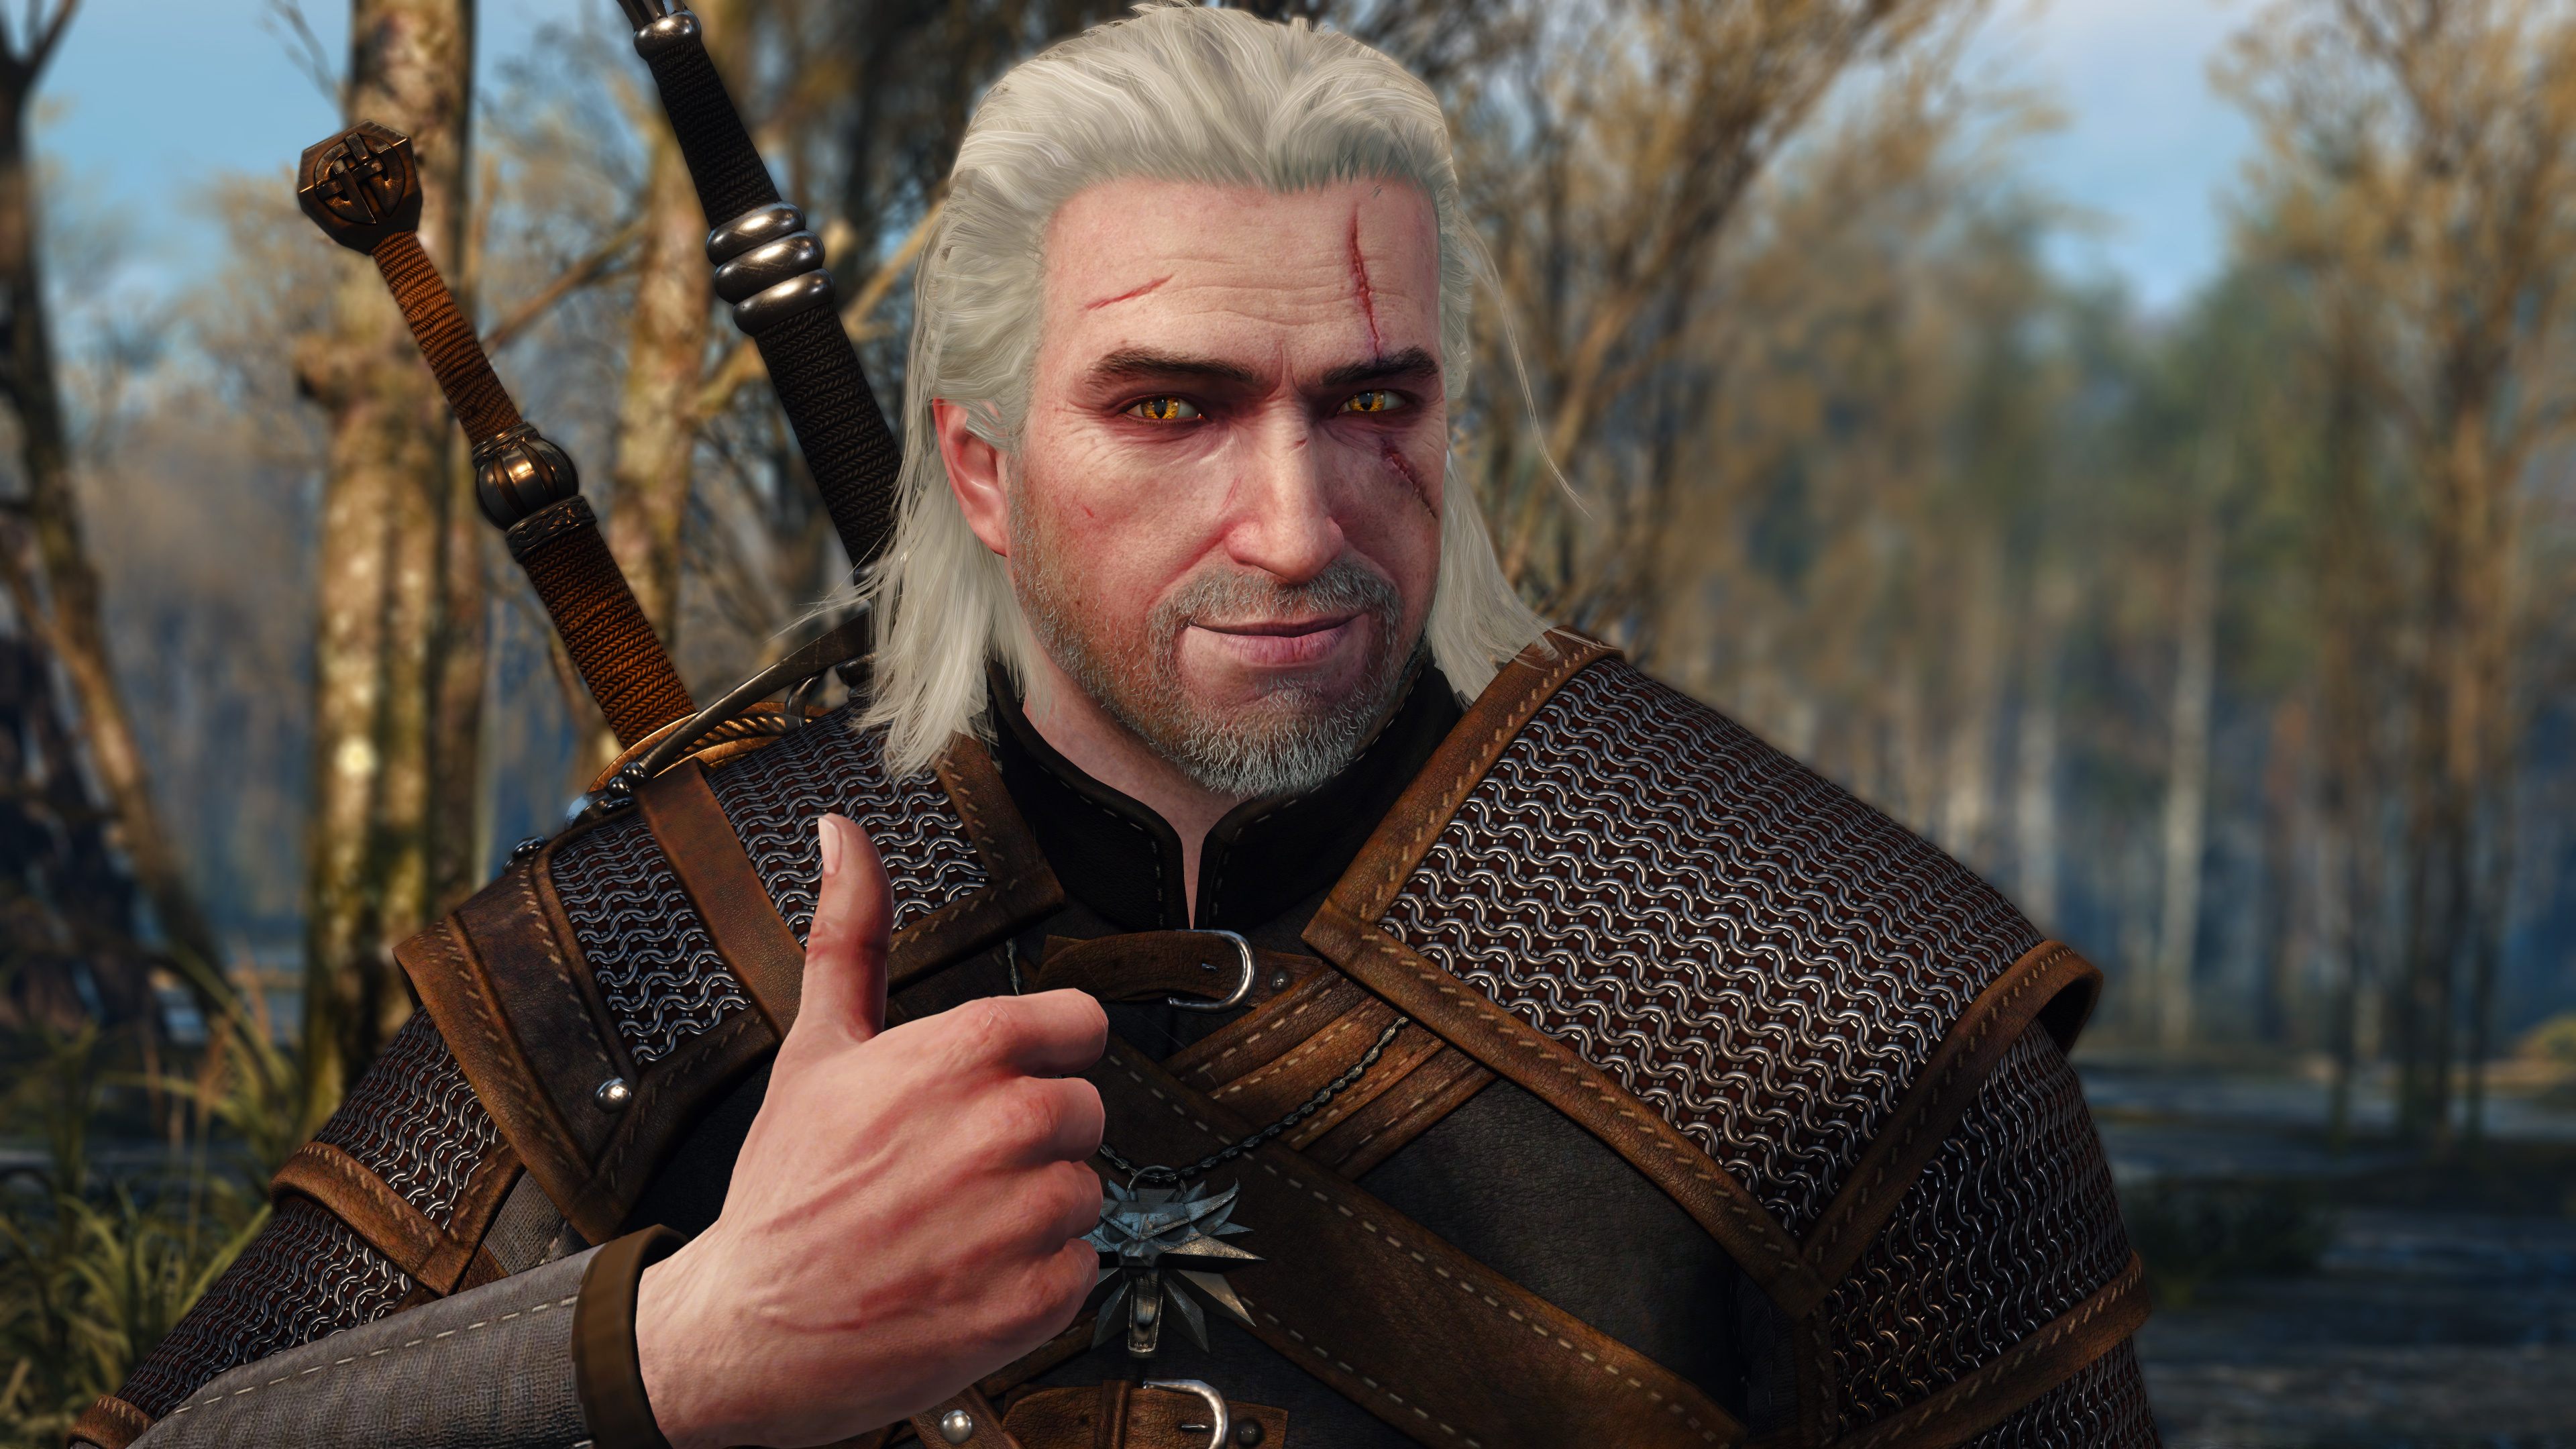 PlayStation Store Sales Charts: The Witcher 3 Is Still Riding High on